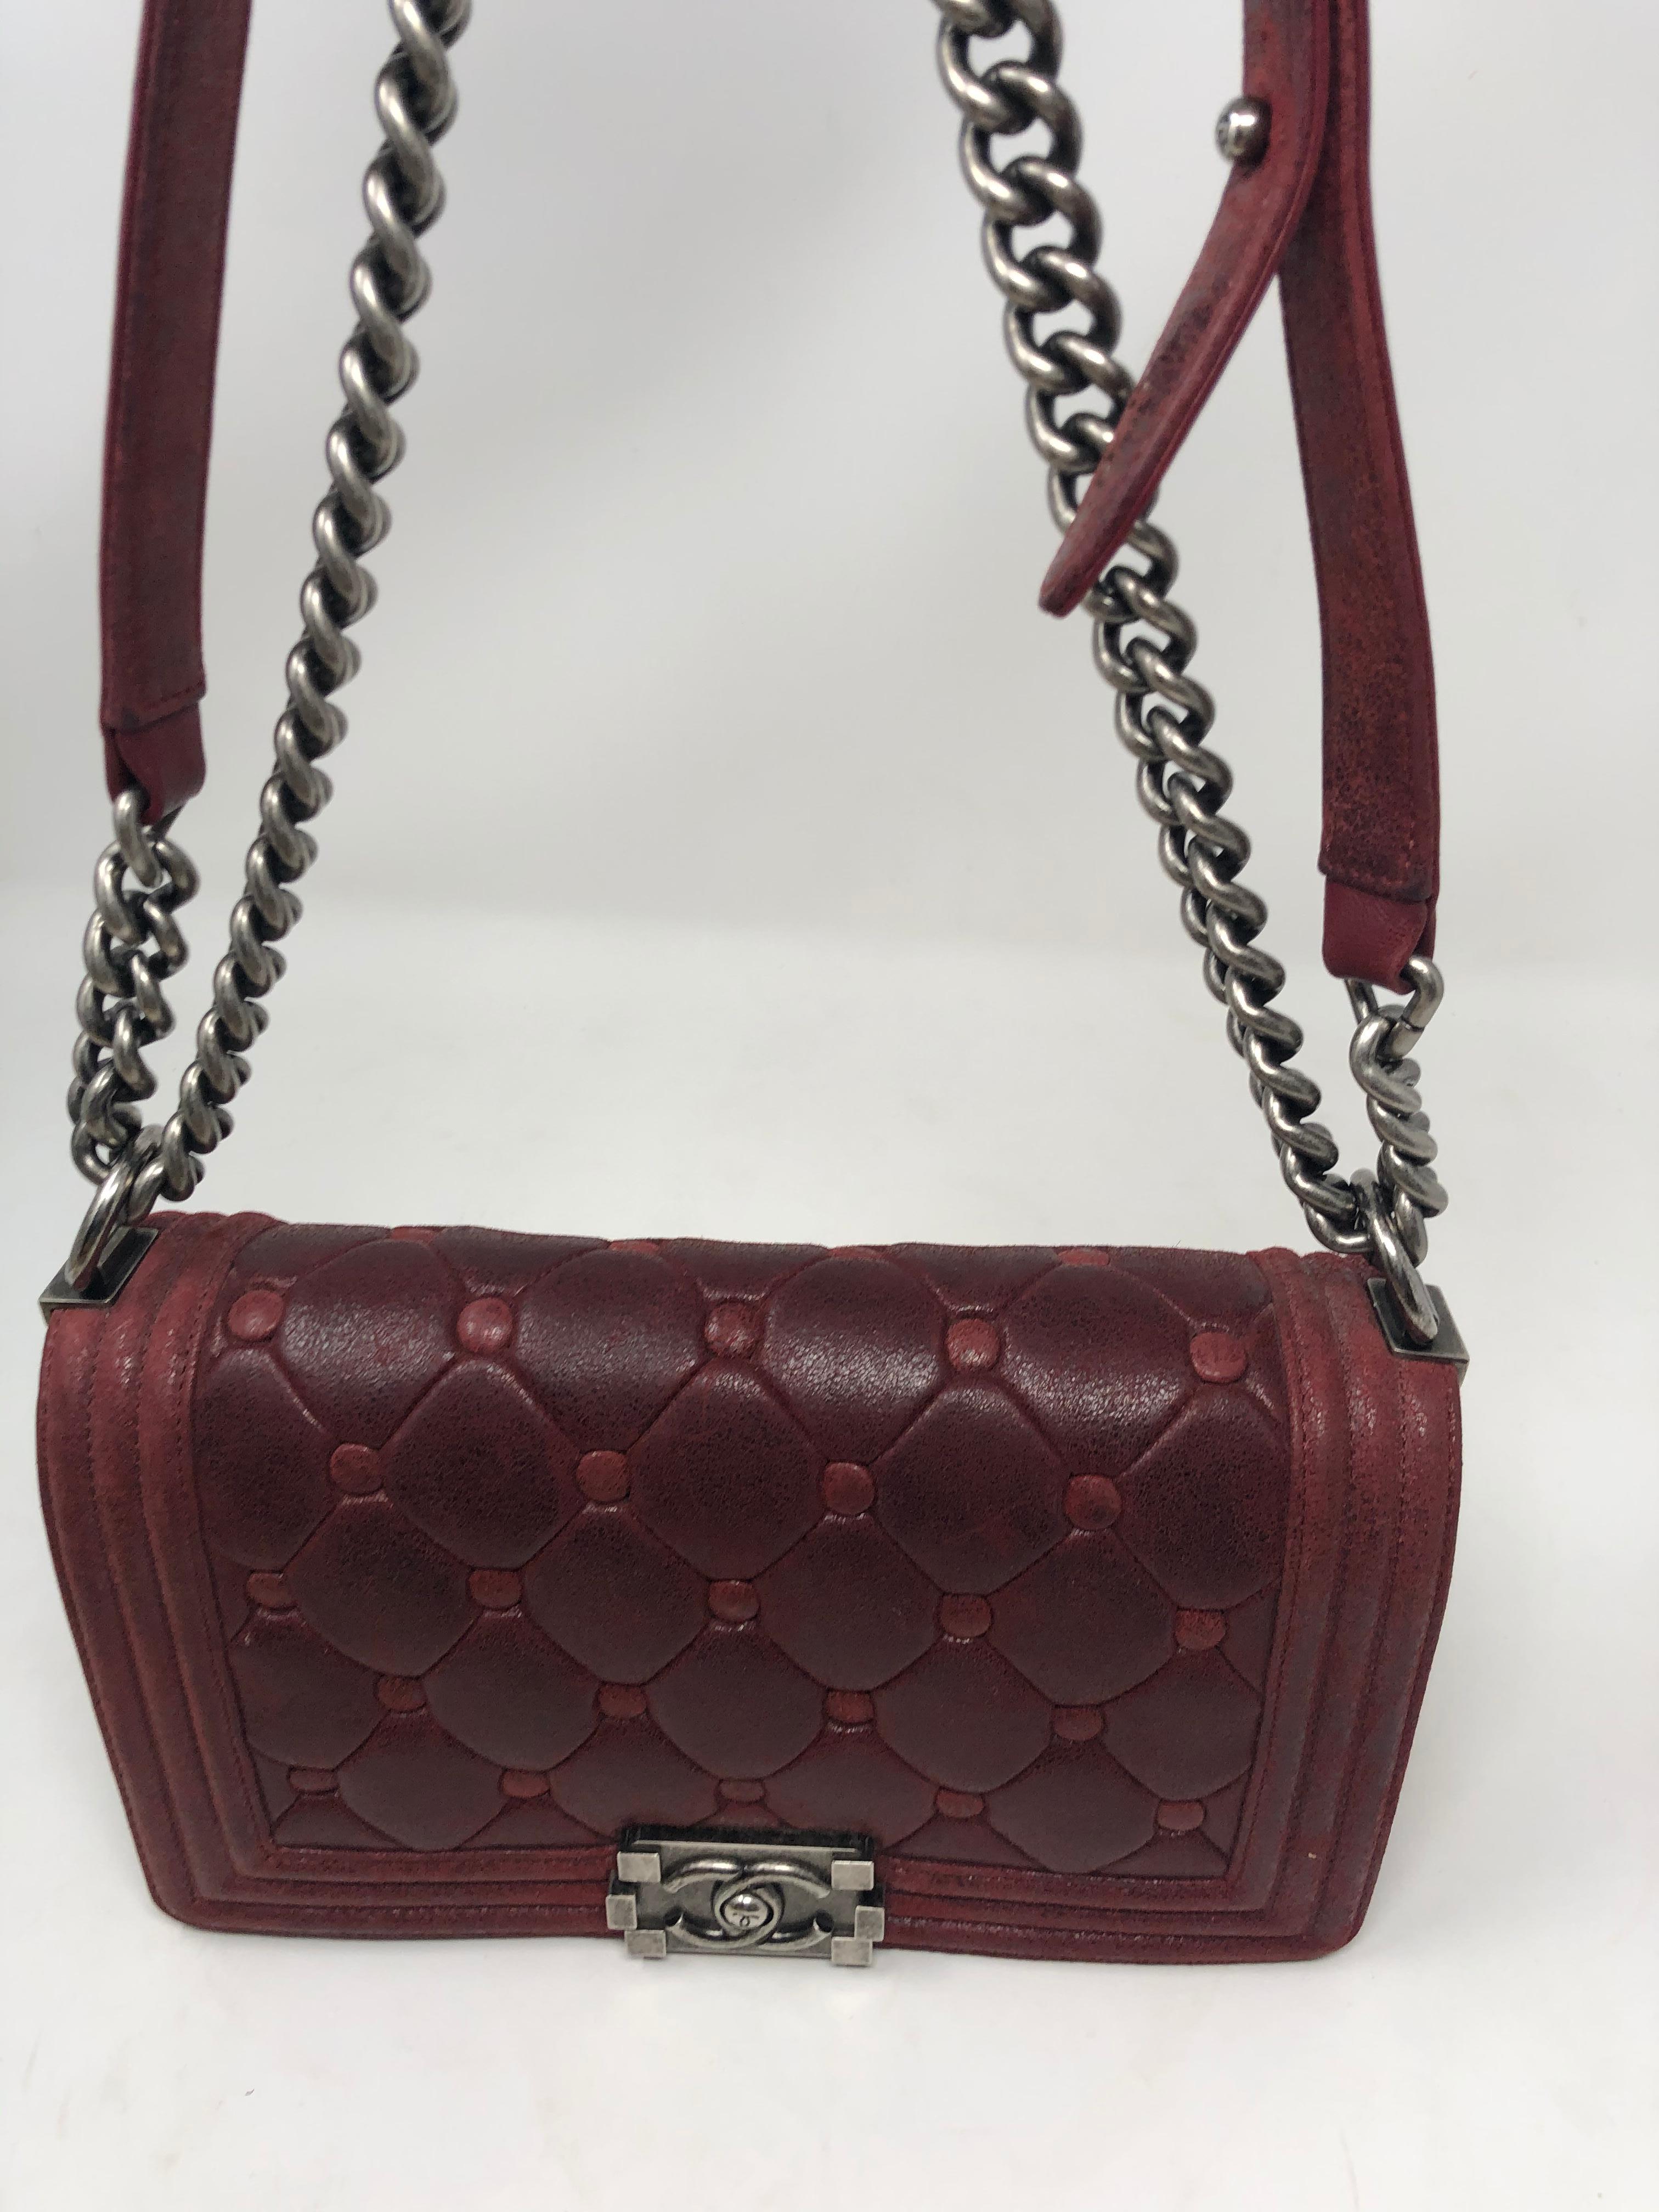 Chanel Burgundy Leather Limited Boy Bag. Unique design and rich burgundy color. Silver hardware. Good condition. Guaranteed authentic. 